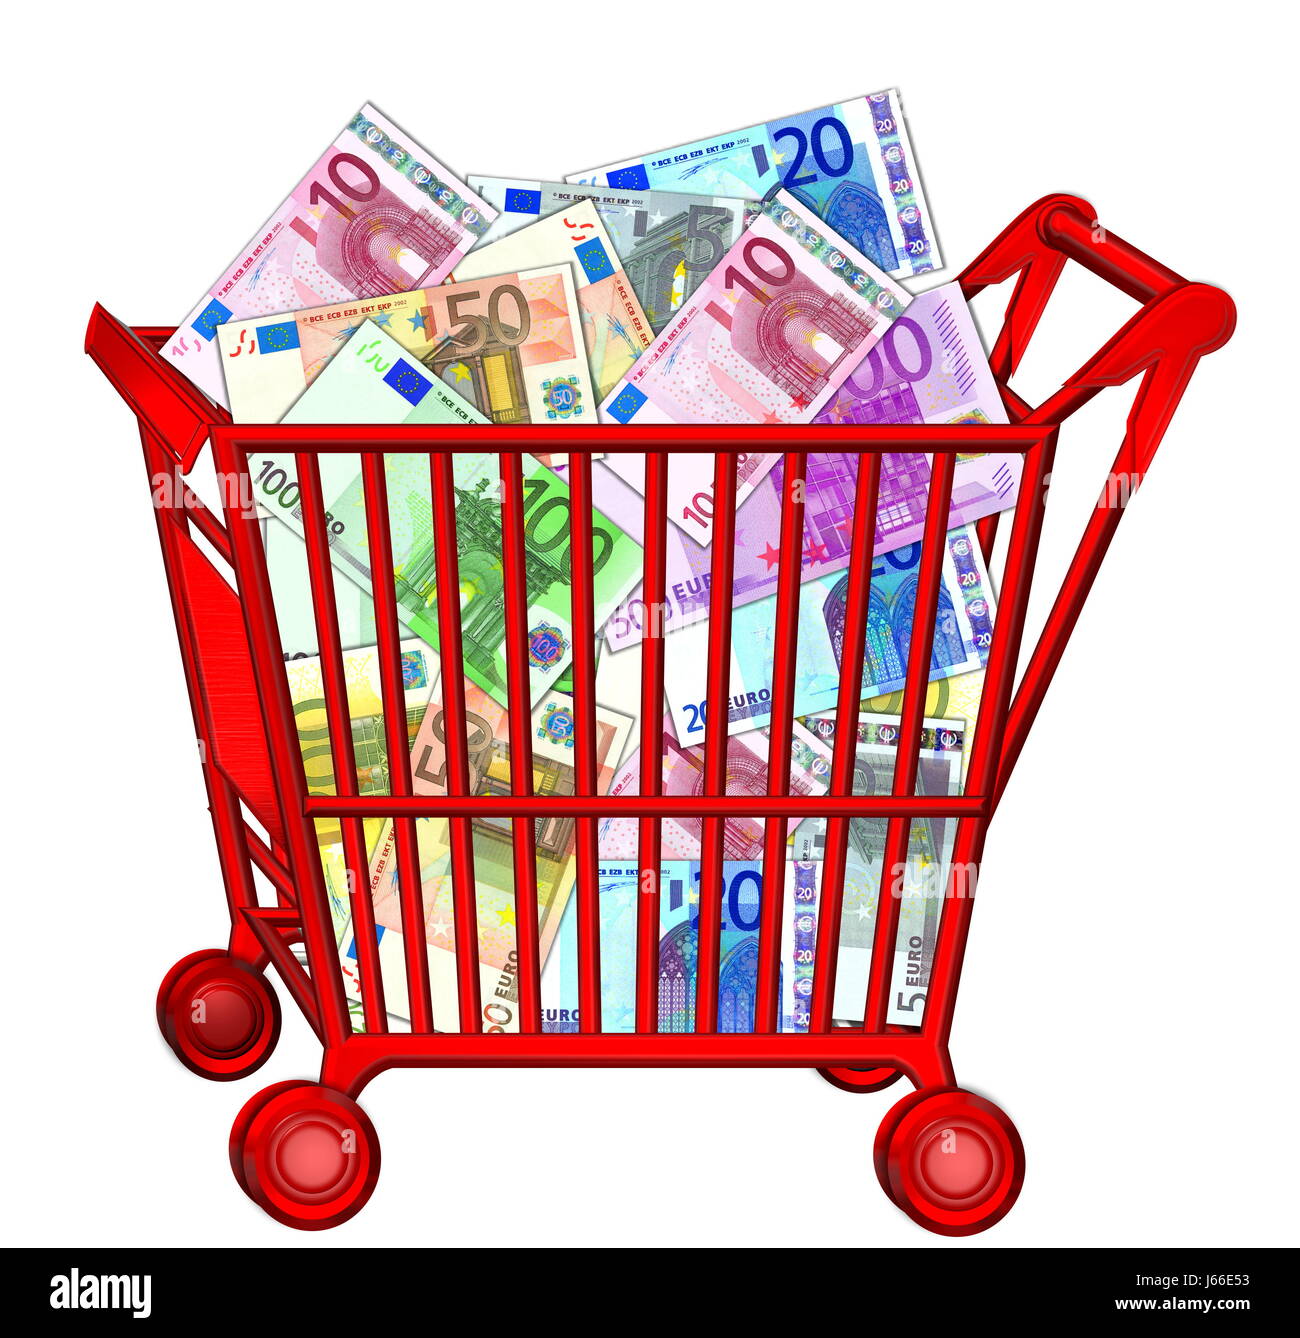 shopping bank note trolley cart issue money consumption currency wheels metal Stock Photo